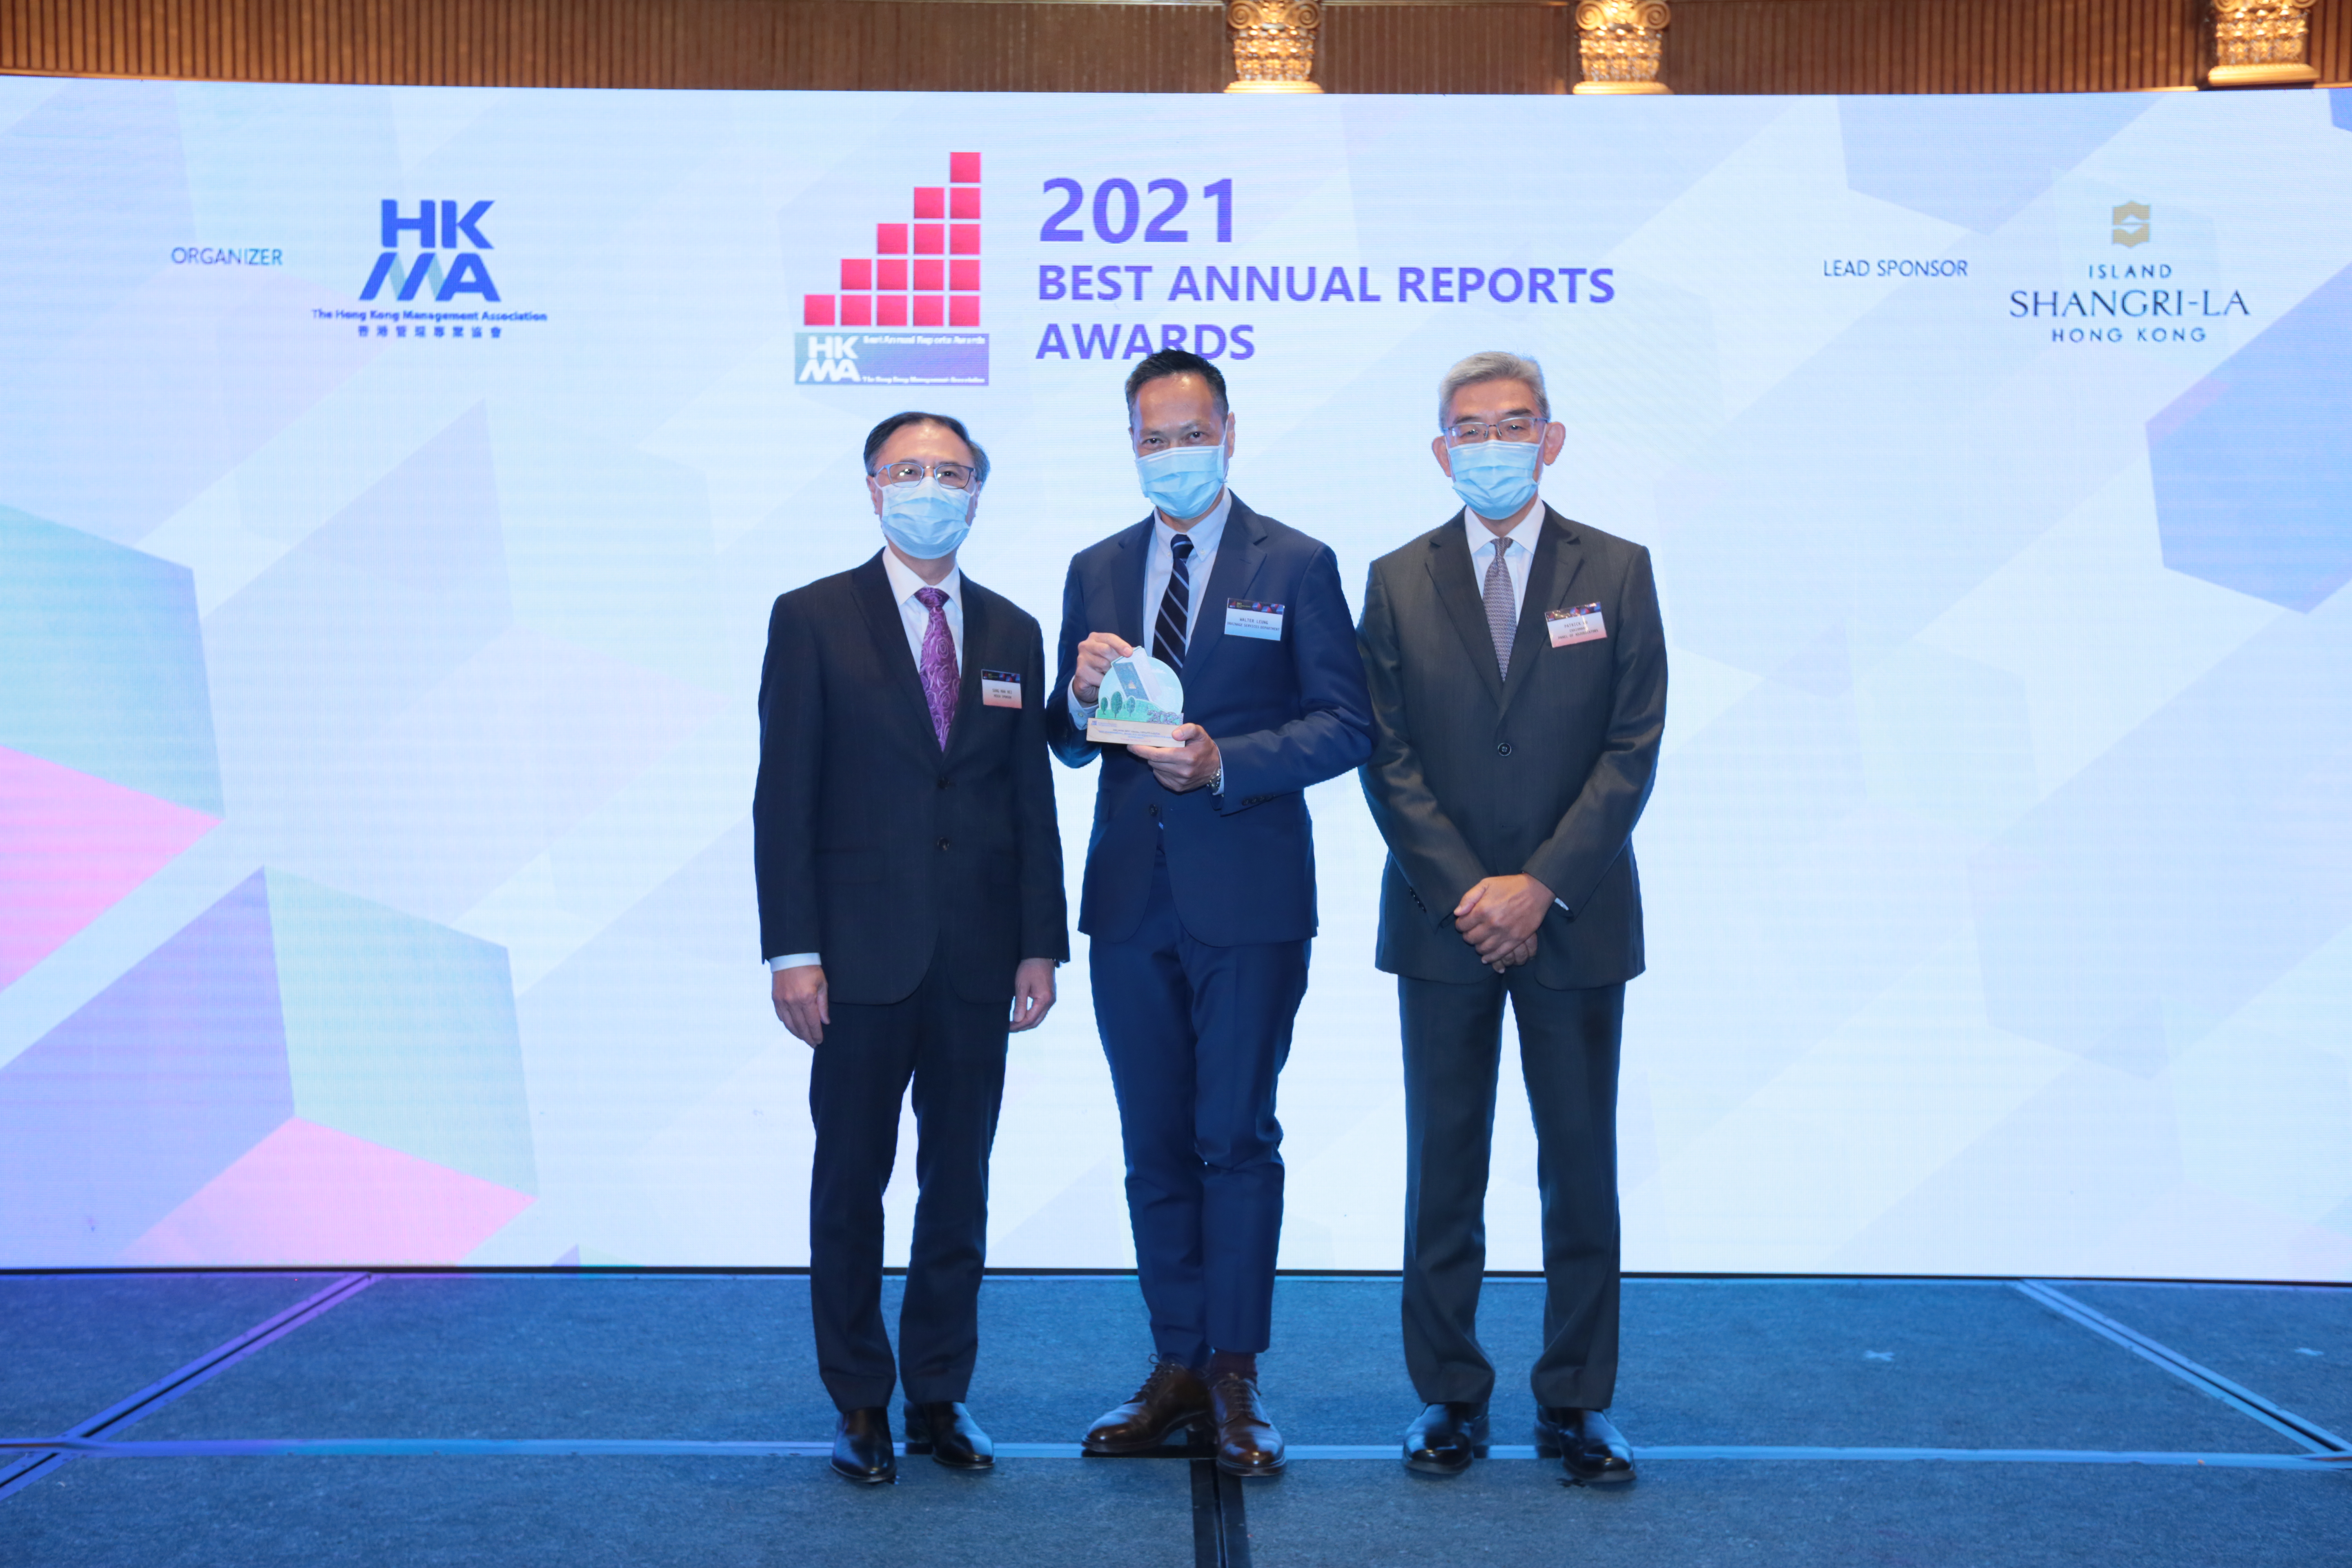 The Assistant Director / Sewage Services of DSD, Mr Walter LEUNG Wing-yuen (centre) received the Best Environmental, Social and Governance Reporting Award (Government) on behalf of the department from The Hong Kong Management Association on 1 November 2021